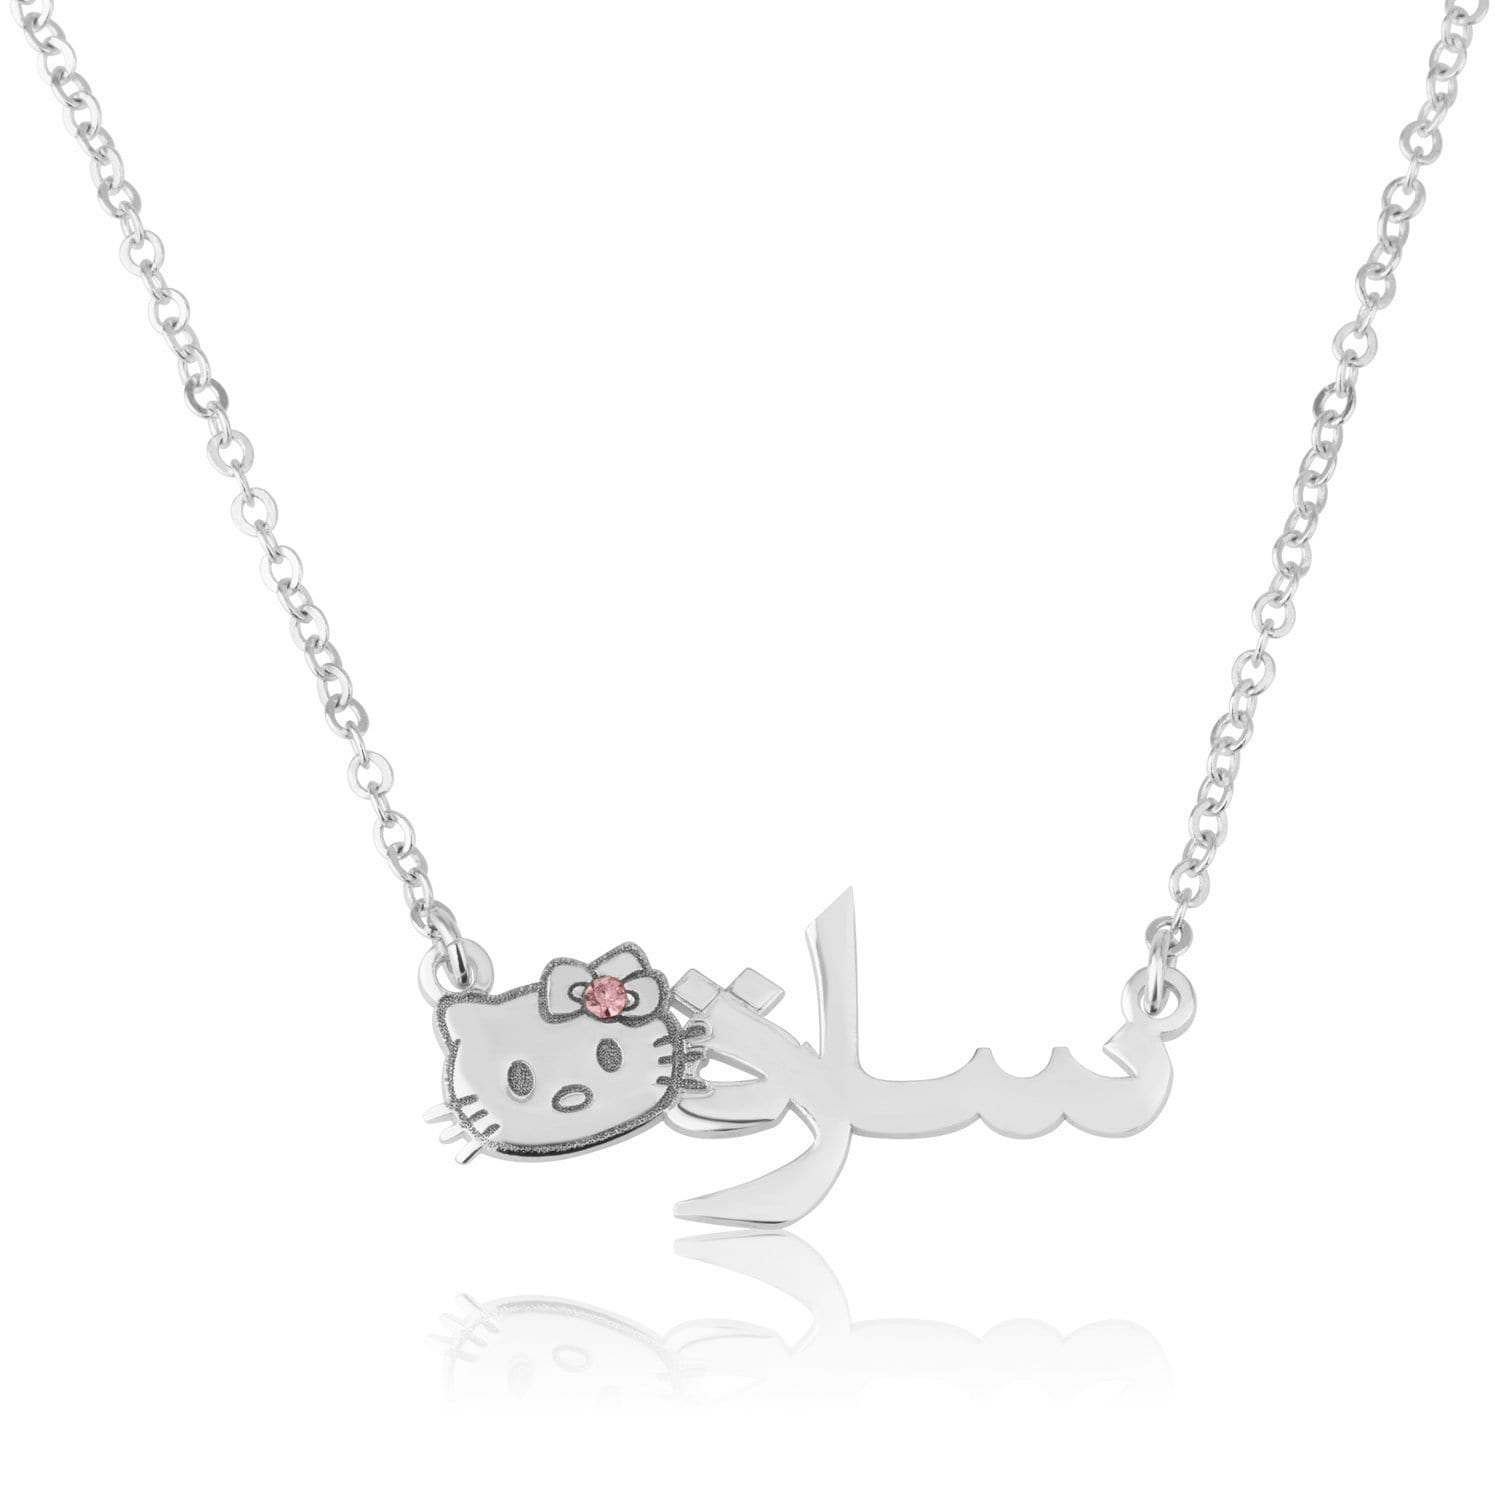 Personalized Arabic Hello Kitty Name Necklace - Beleco Jewelry